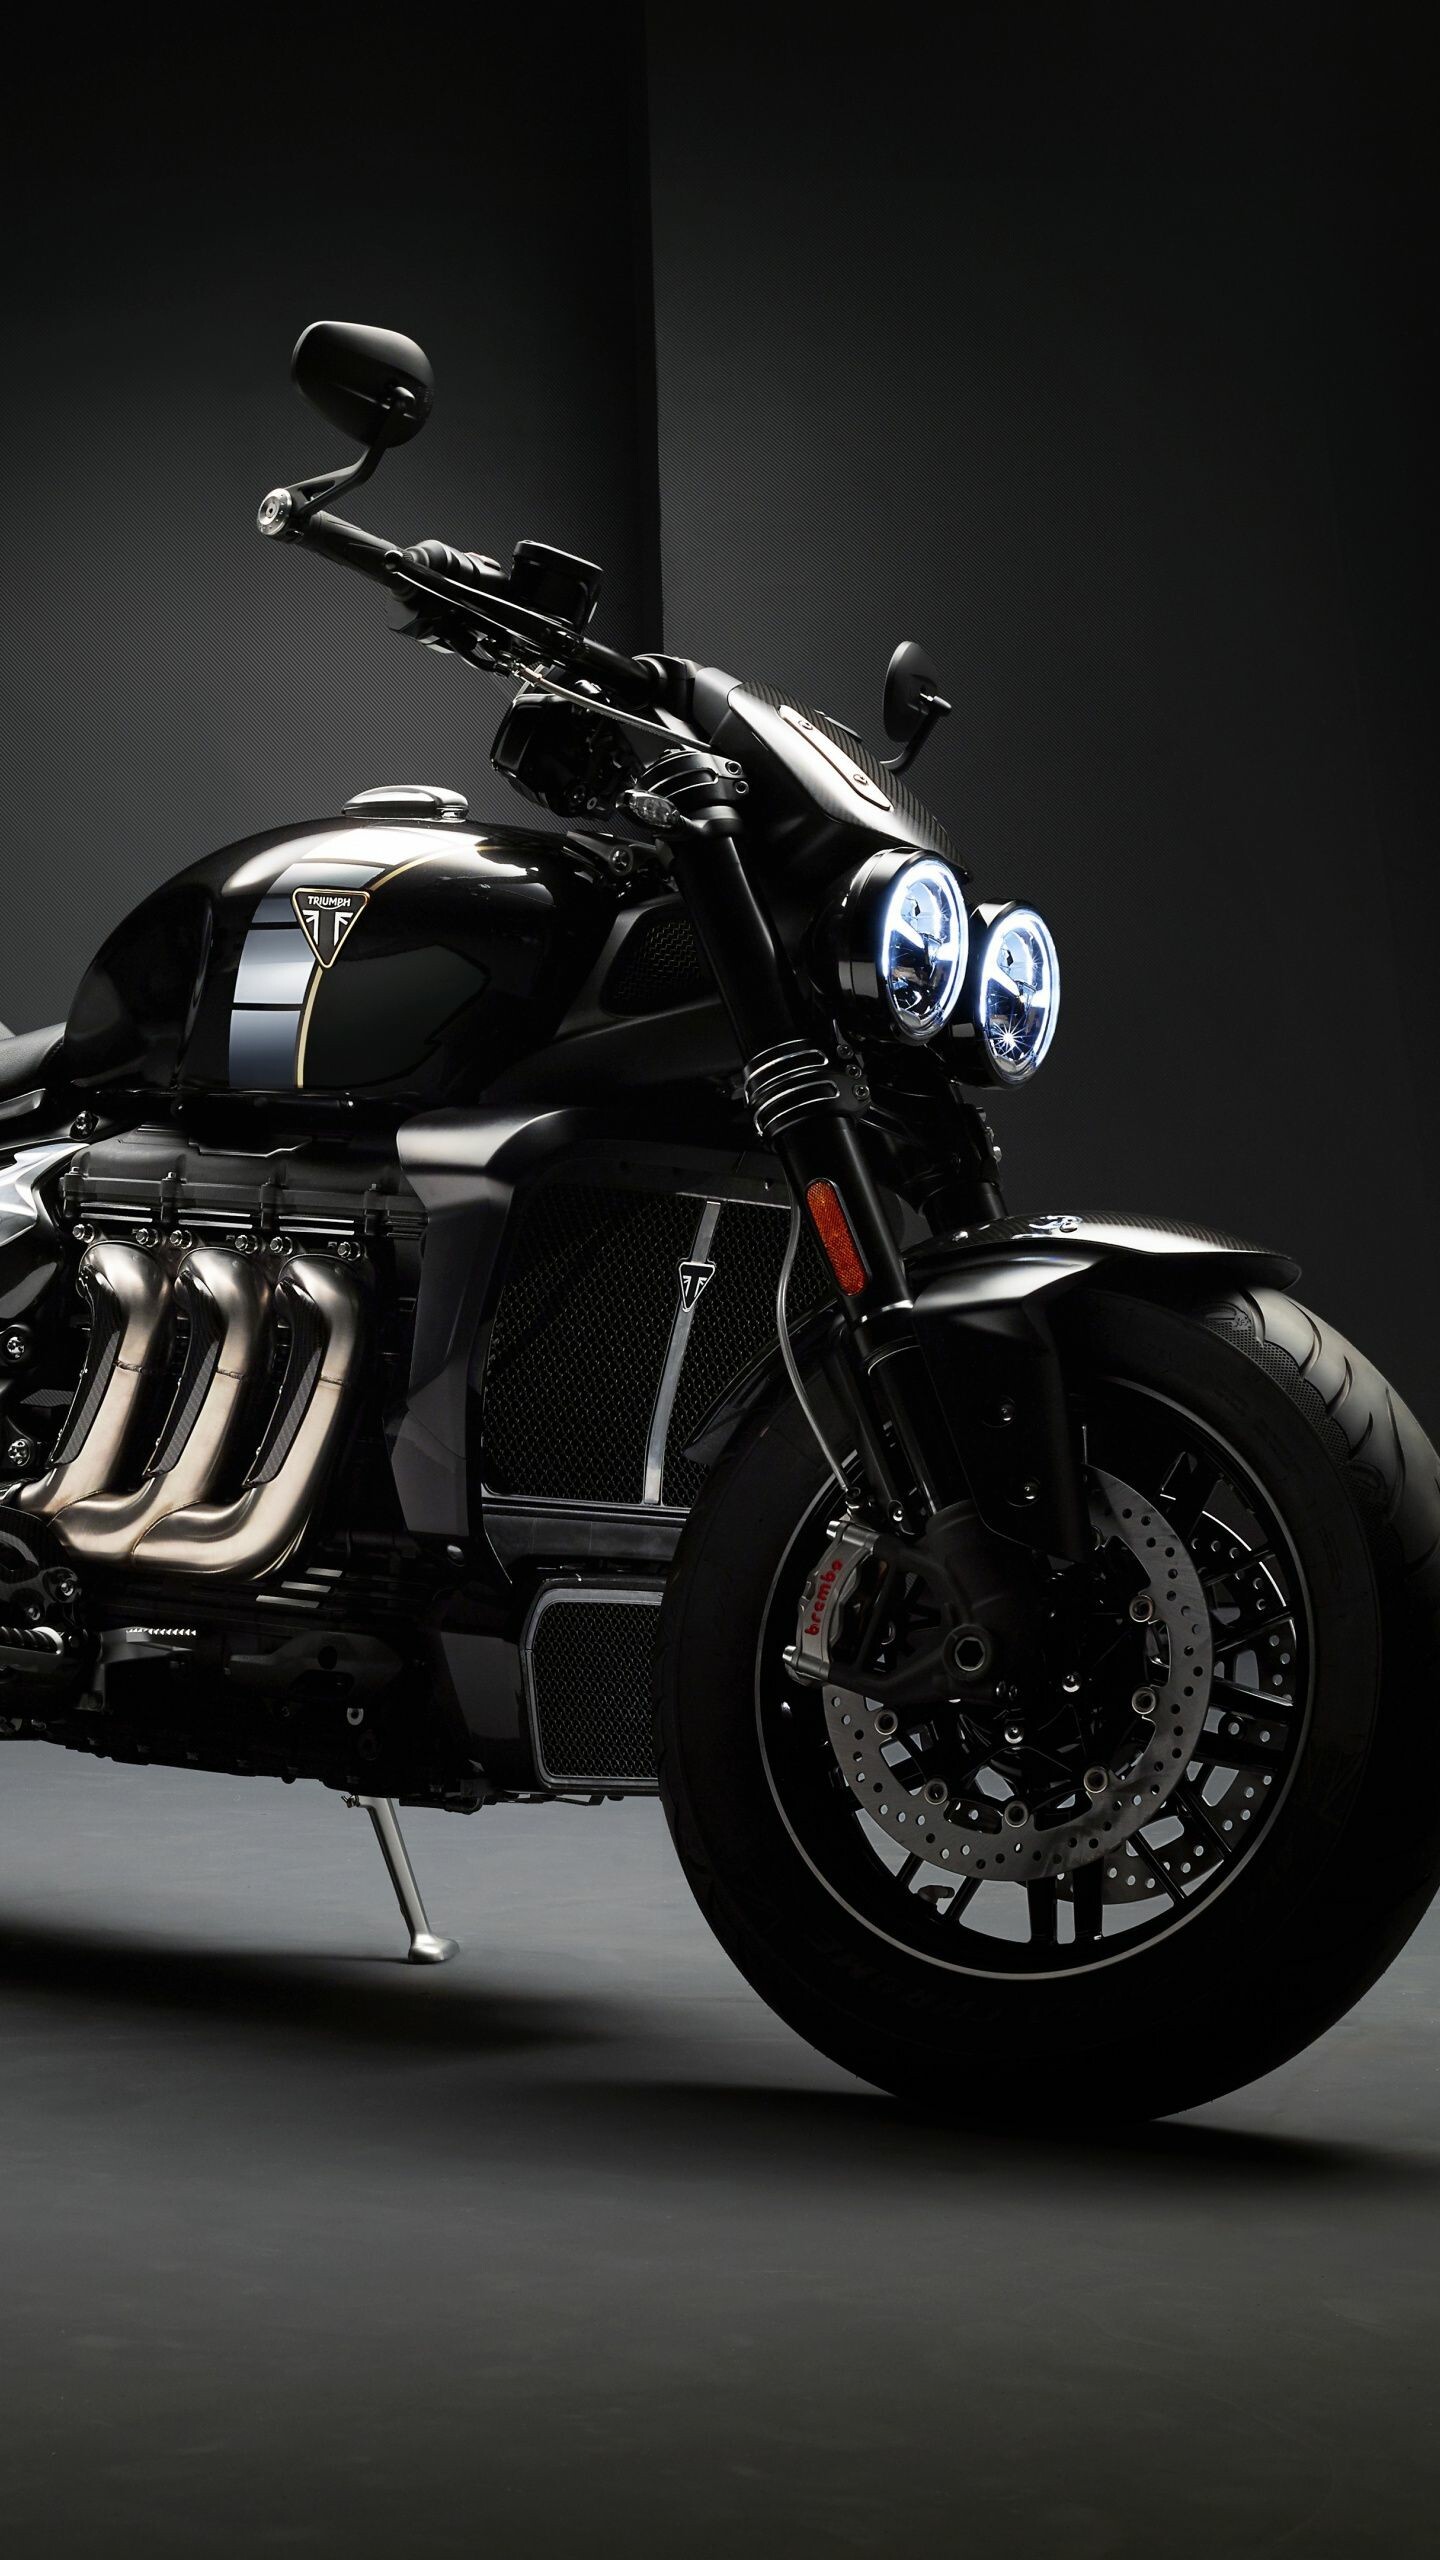 Triumph Motorcycles: Rocket 3 TFC, Characterized by 2,458 cc engine, Motor vehicle. 1440x2560 HD Wallpaper.